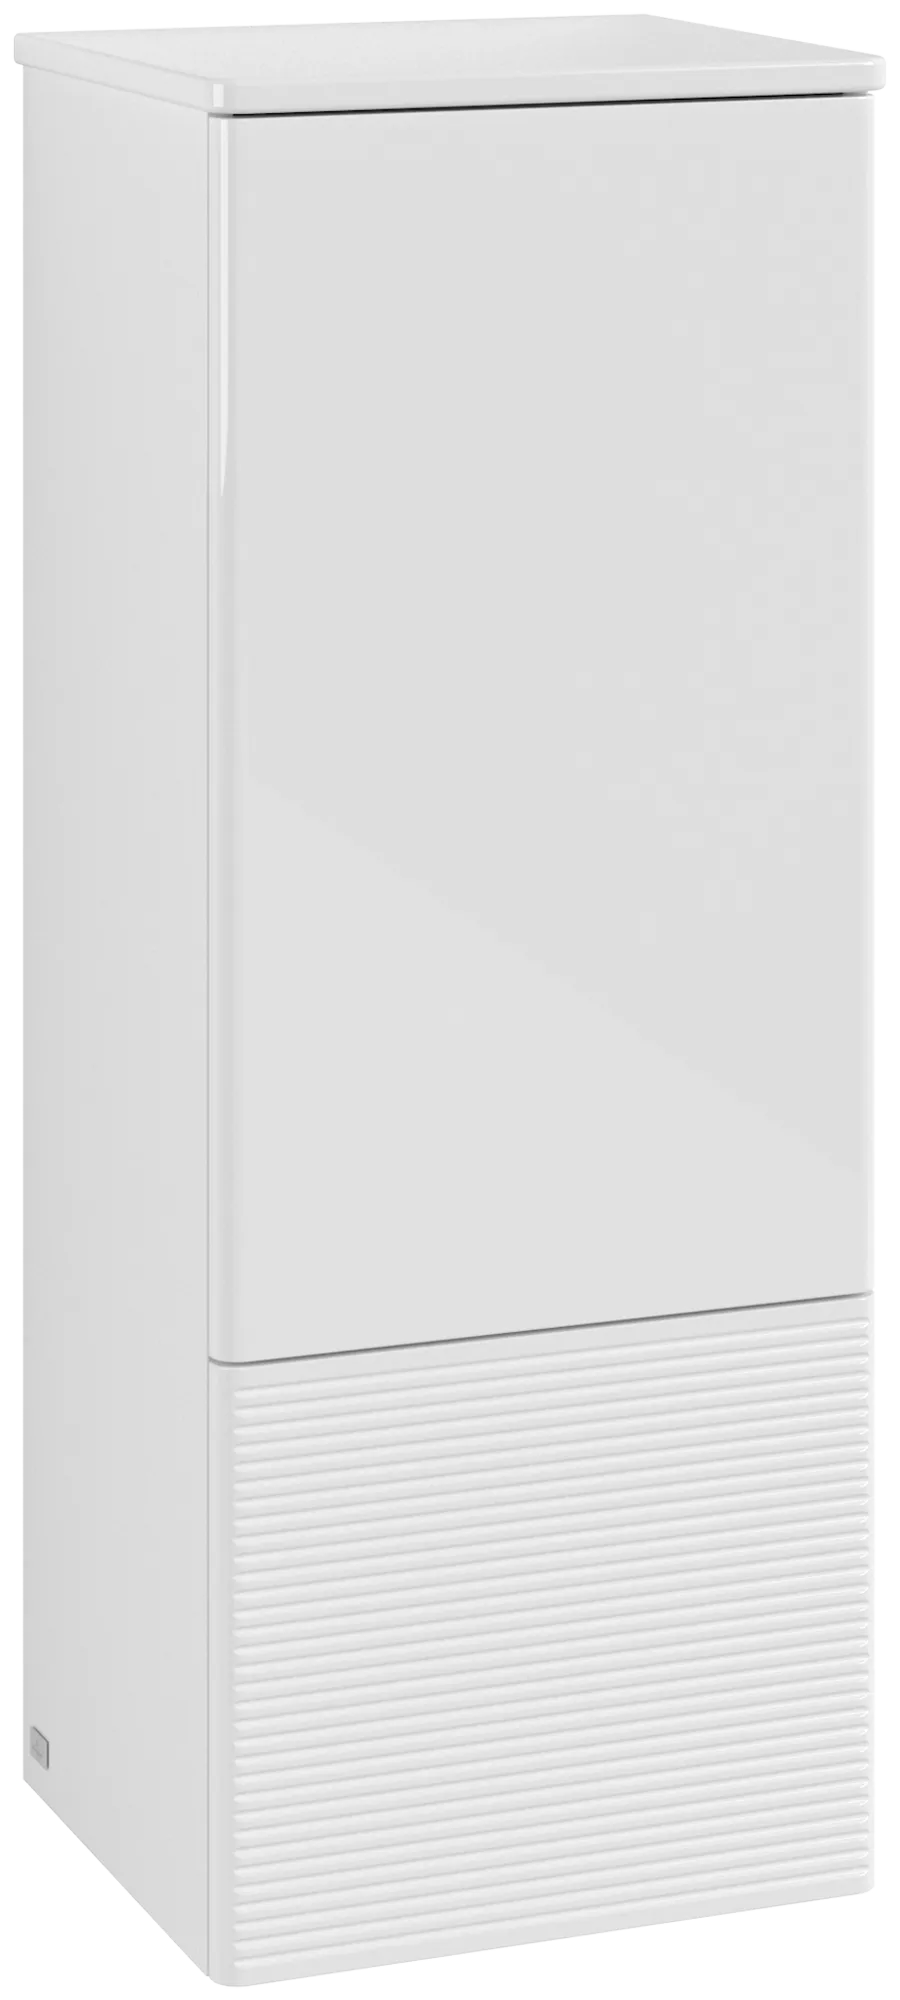 Obrázek VILLEROY BOCH Antao Medium-height cabinet, with lighting, 1 door, 414 x 1039 x 356 mm, Front with grain texture, Glossy White Lacquer / Glossy White Lacquer #L44100GF